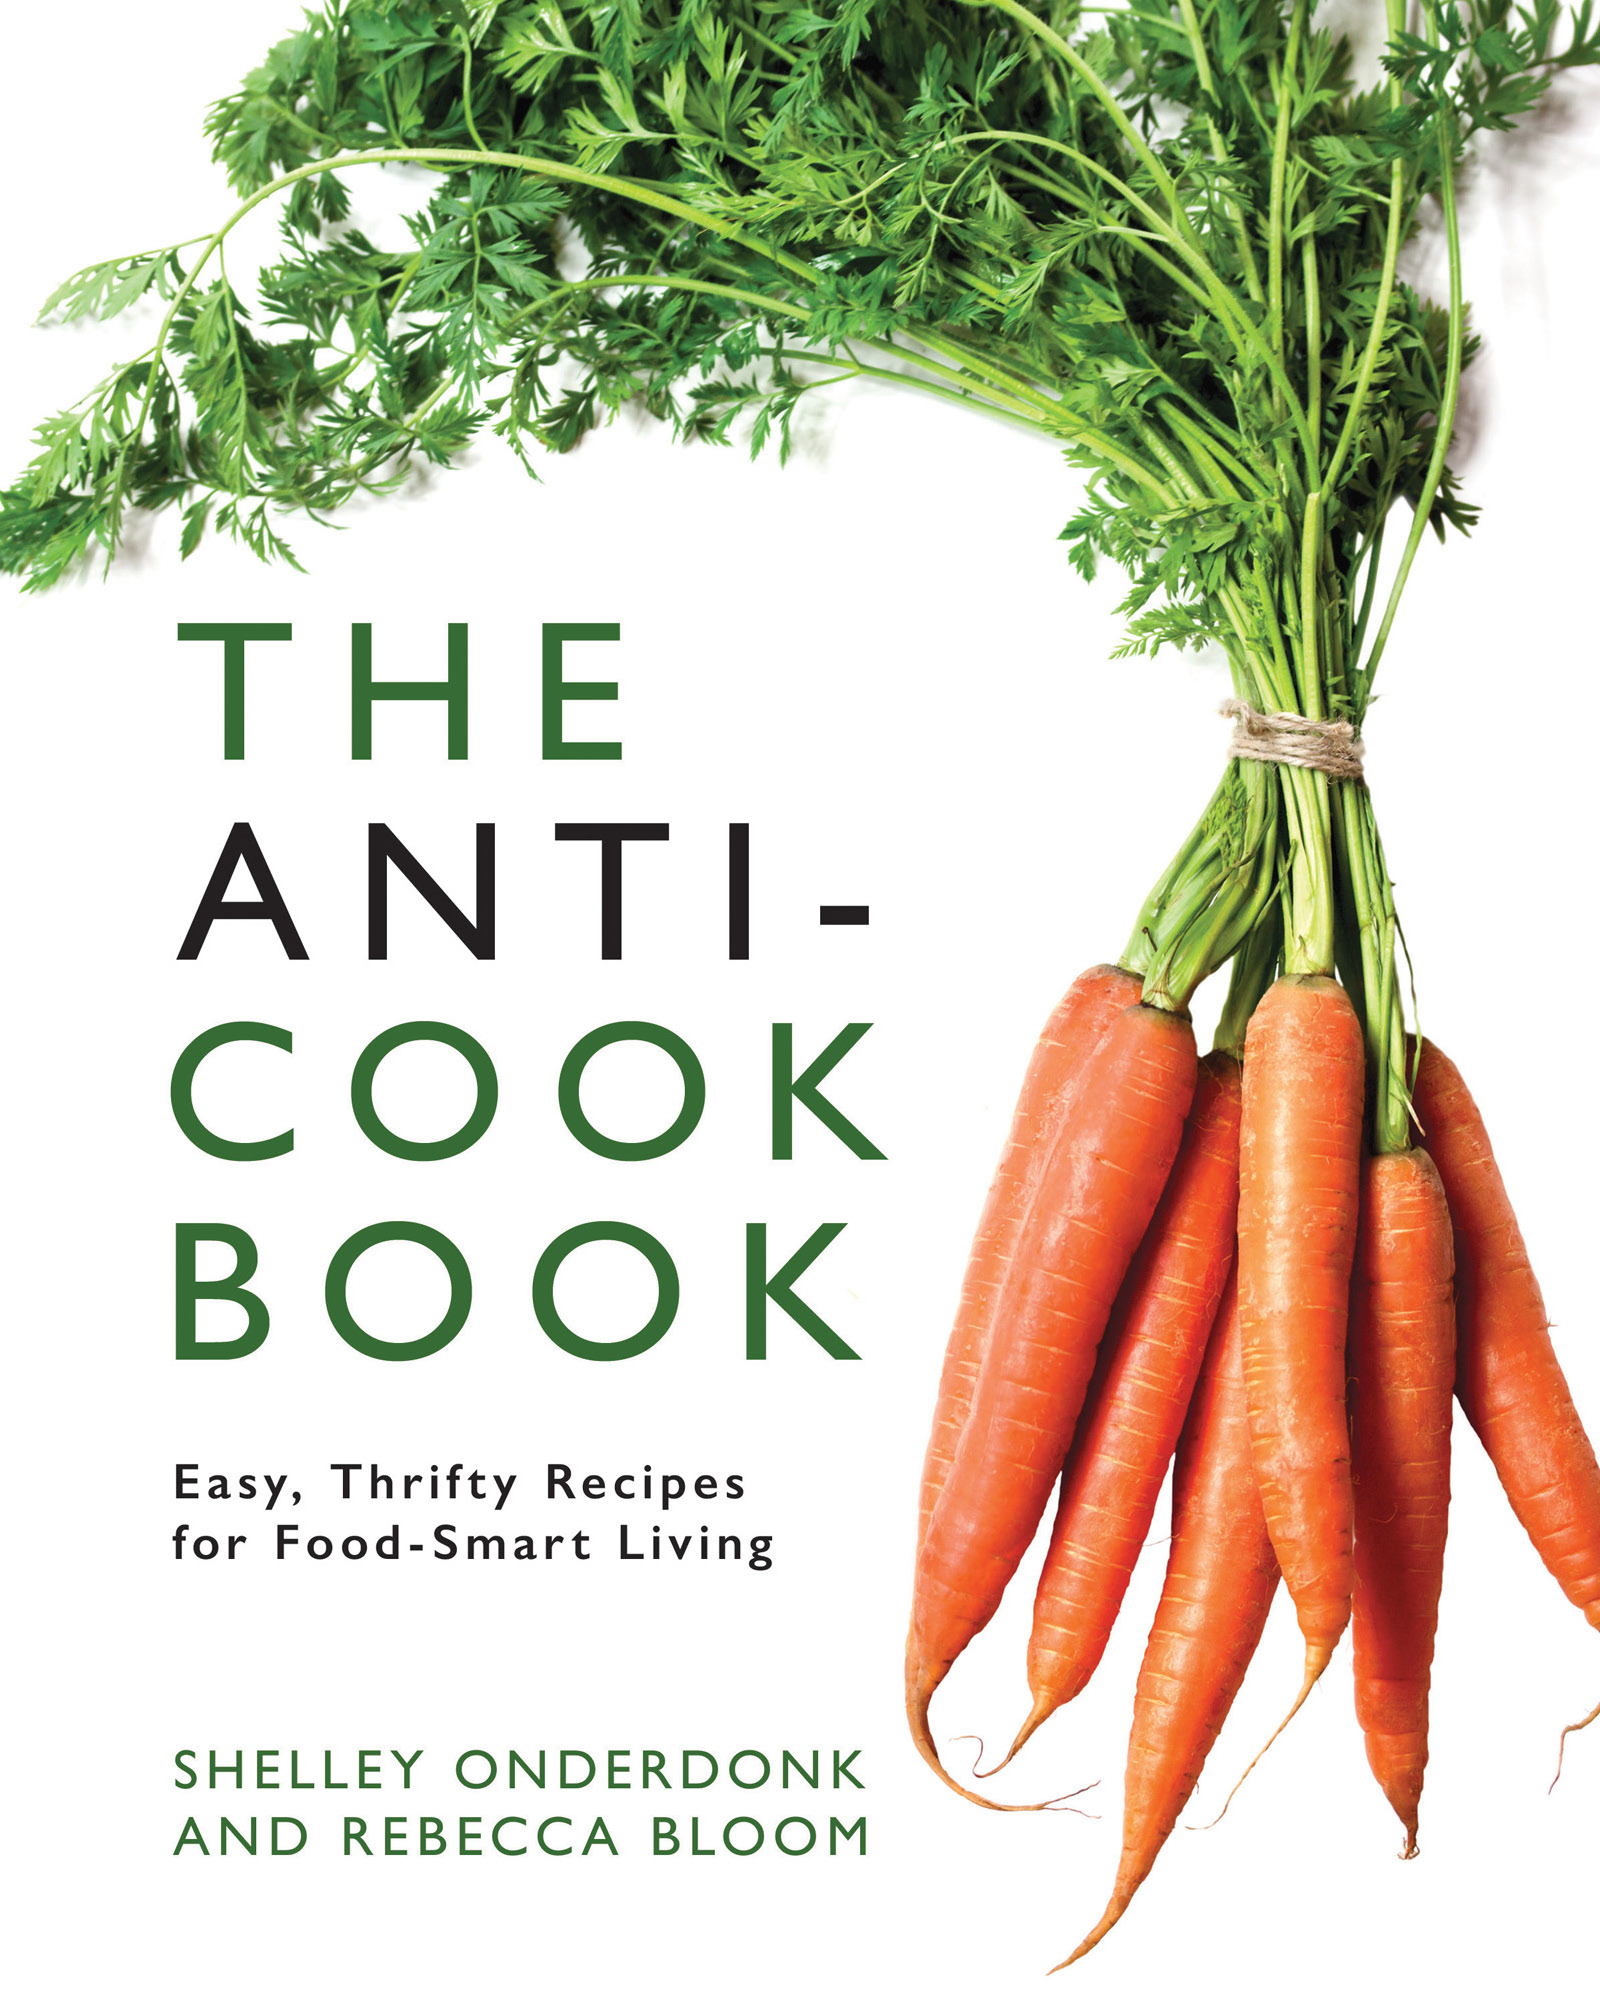 Cookbook Launch: The Anti-Cookbook: Easy, Thrifty Recipes for Food-Smart Living by Shelley Onderdonk & Rebecca Bloom